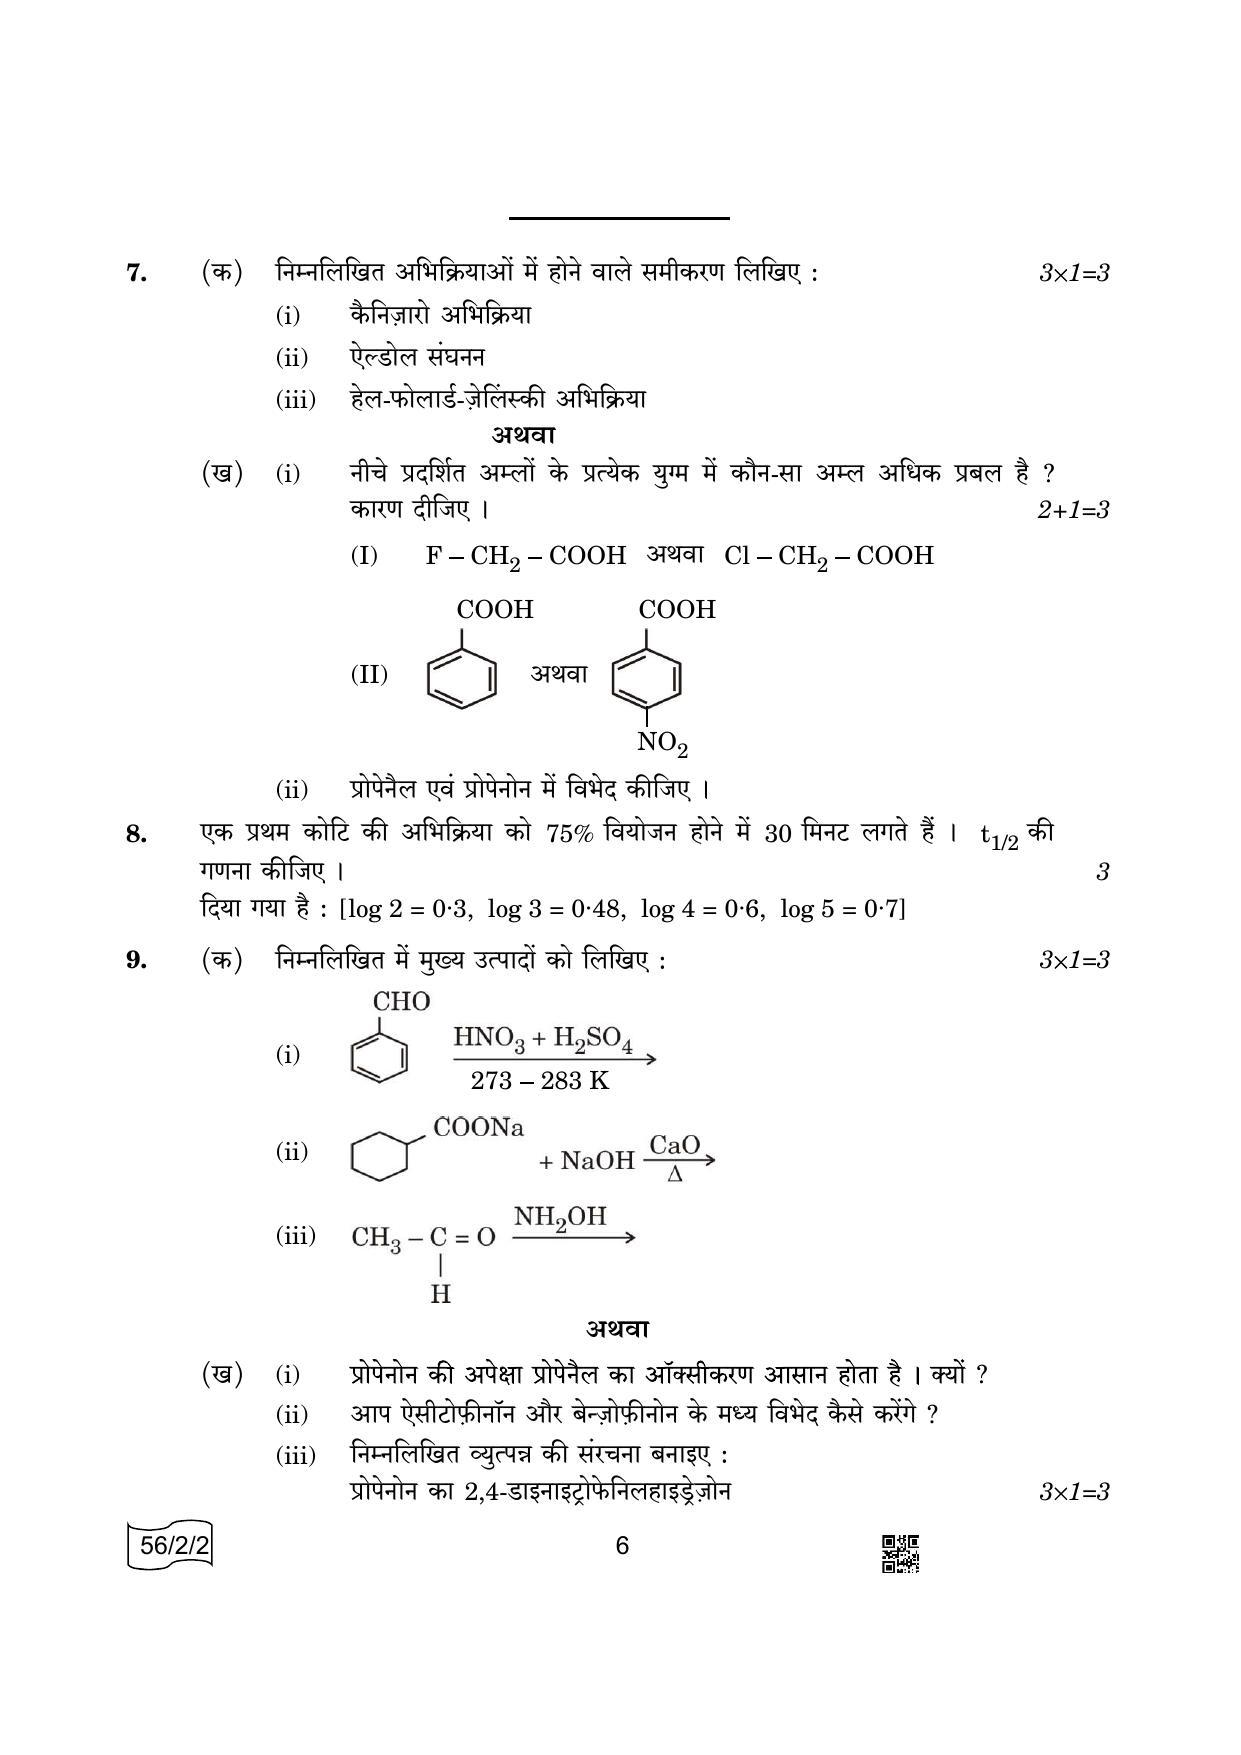 CBSE Class 12 56-2-2 Chemistry 2022 Question Paper - Page 6